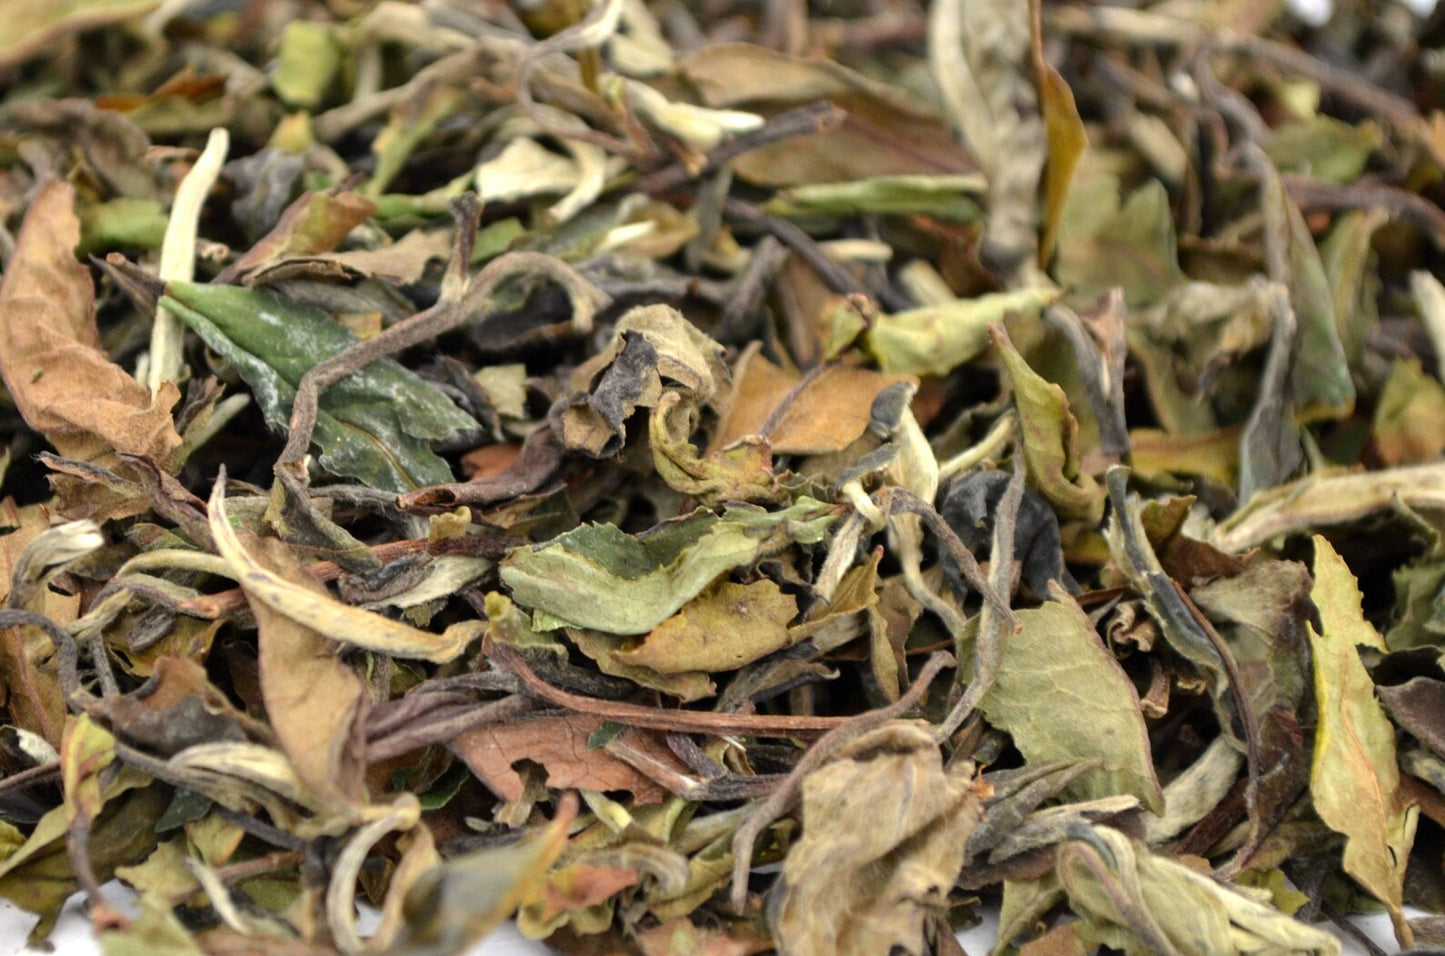 Our organic Pai Mu Tan is a white tea that offers a fresh aroma and a smooth velvety flavour. The tasting notes of Pai Mu Tan are delicate, jammy and reminiscent of a mild Bordeaux.